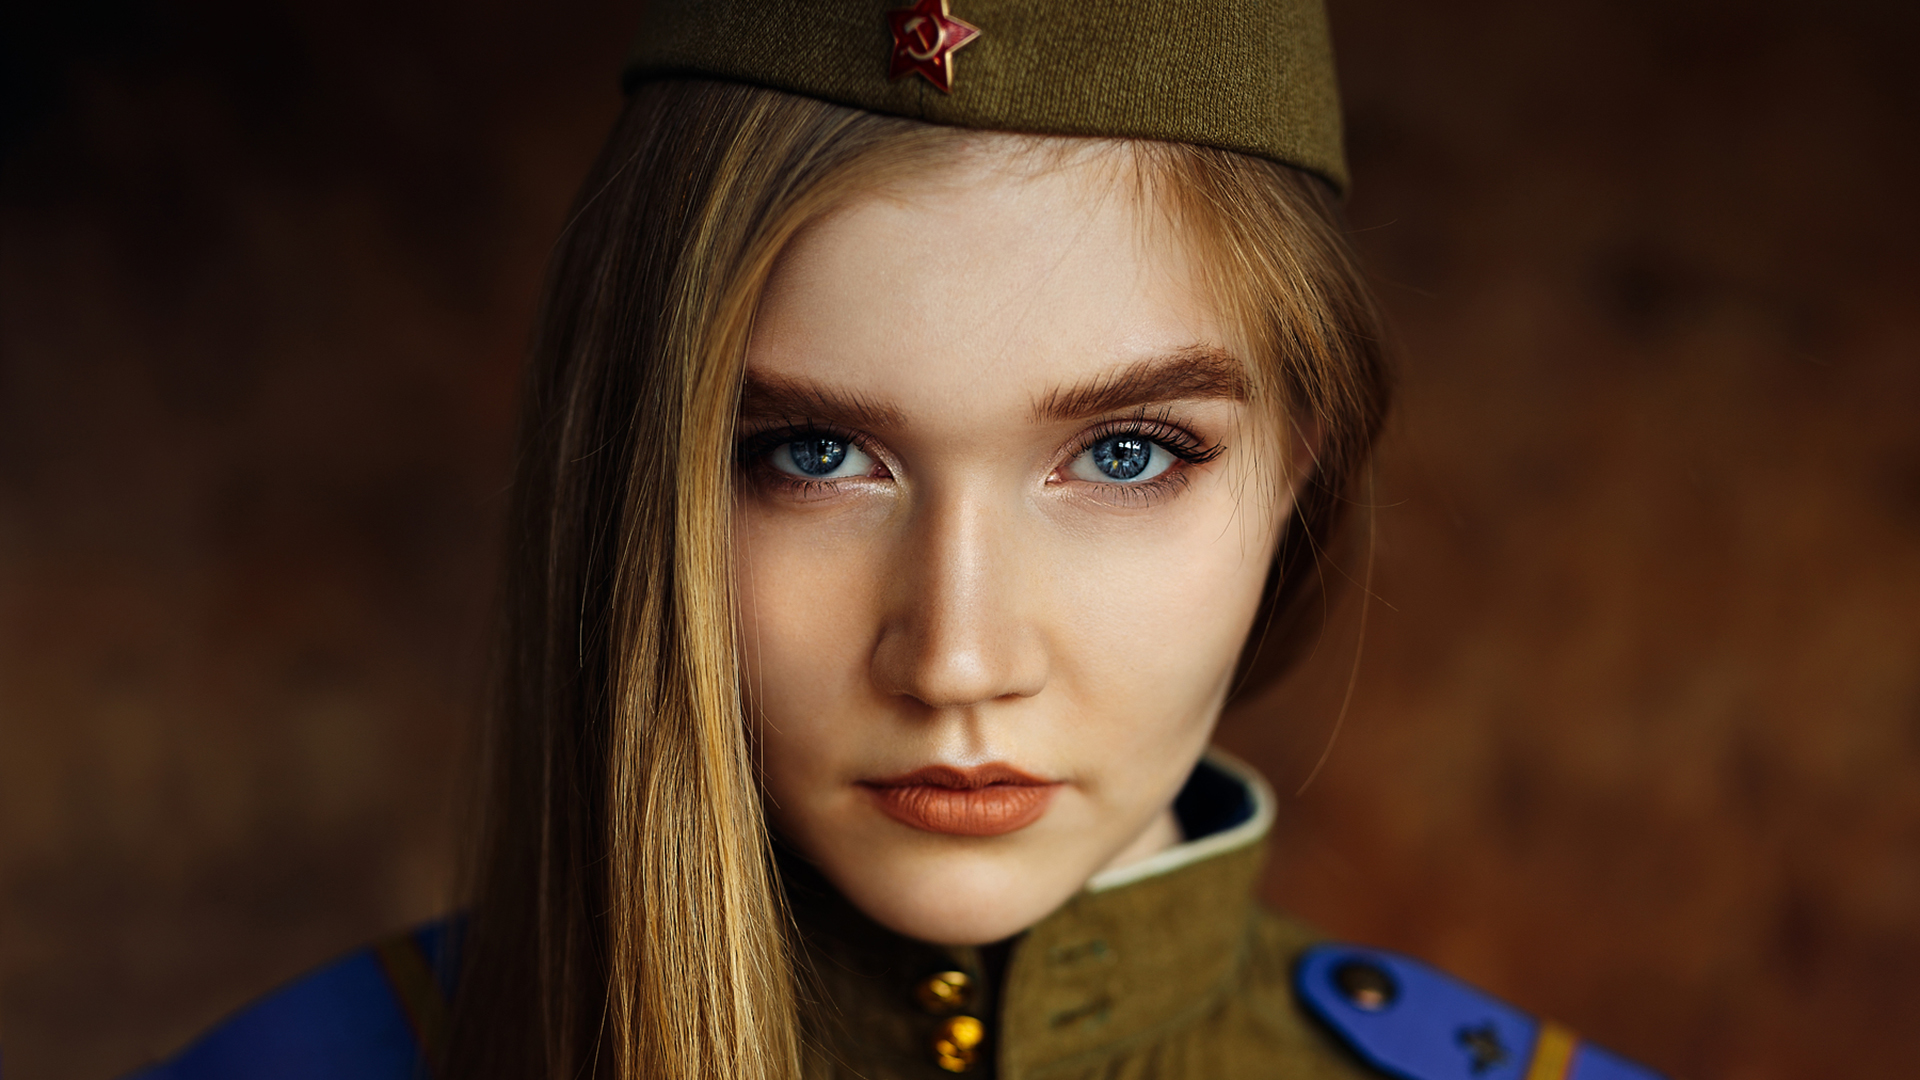 People 1920x1080 women blonde face portrait blue eyes hammer and sickle USSR uniform red star